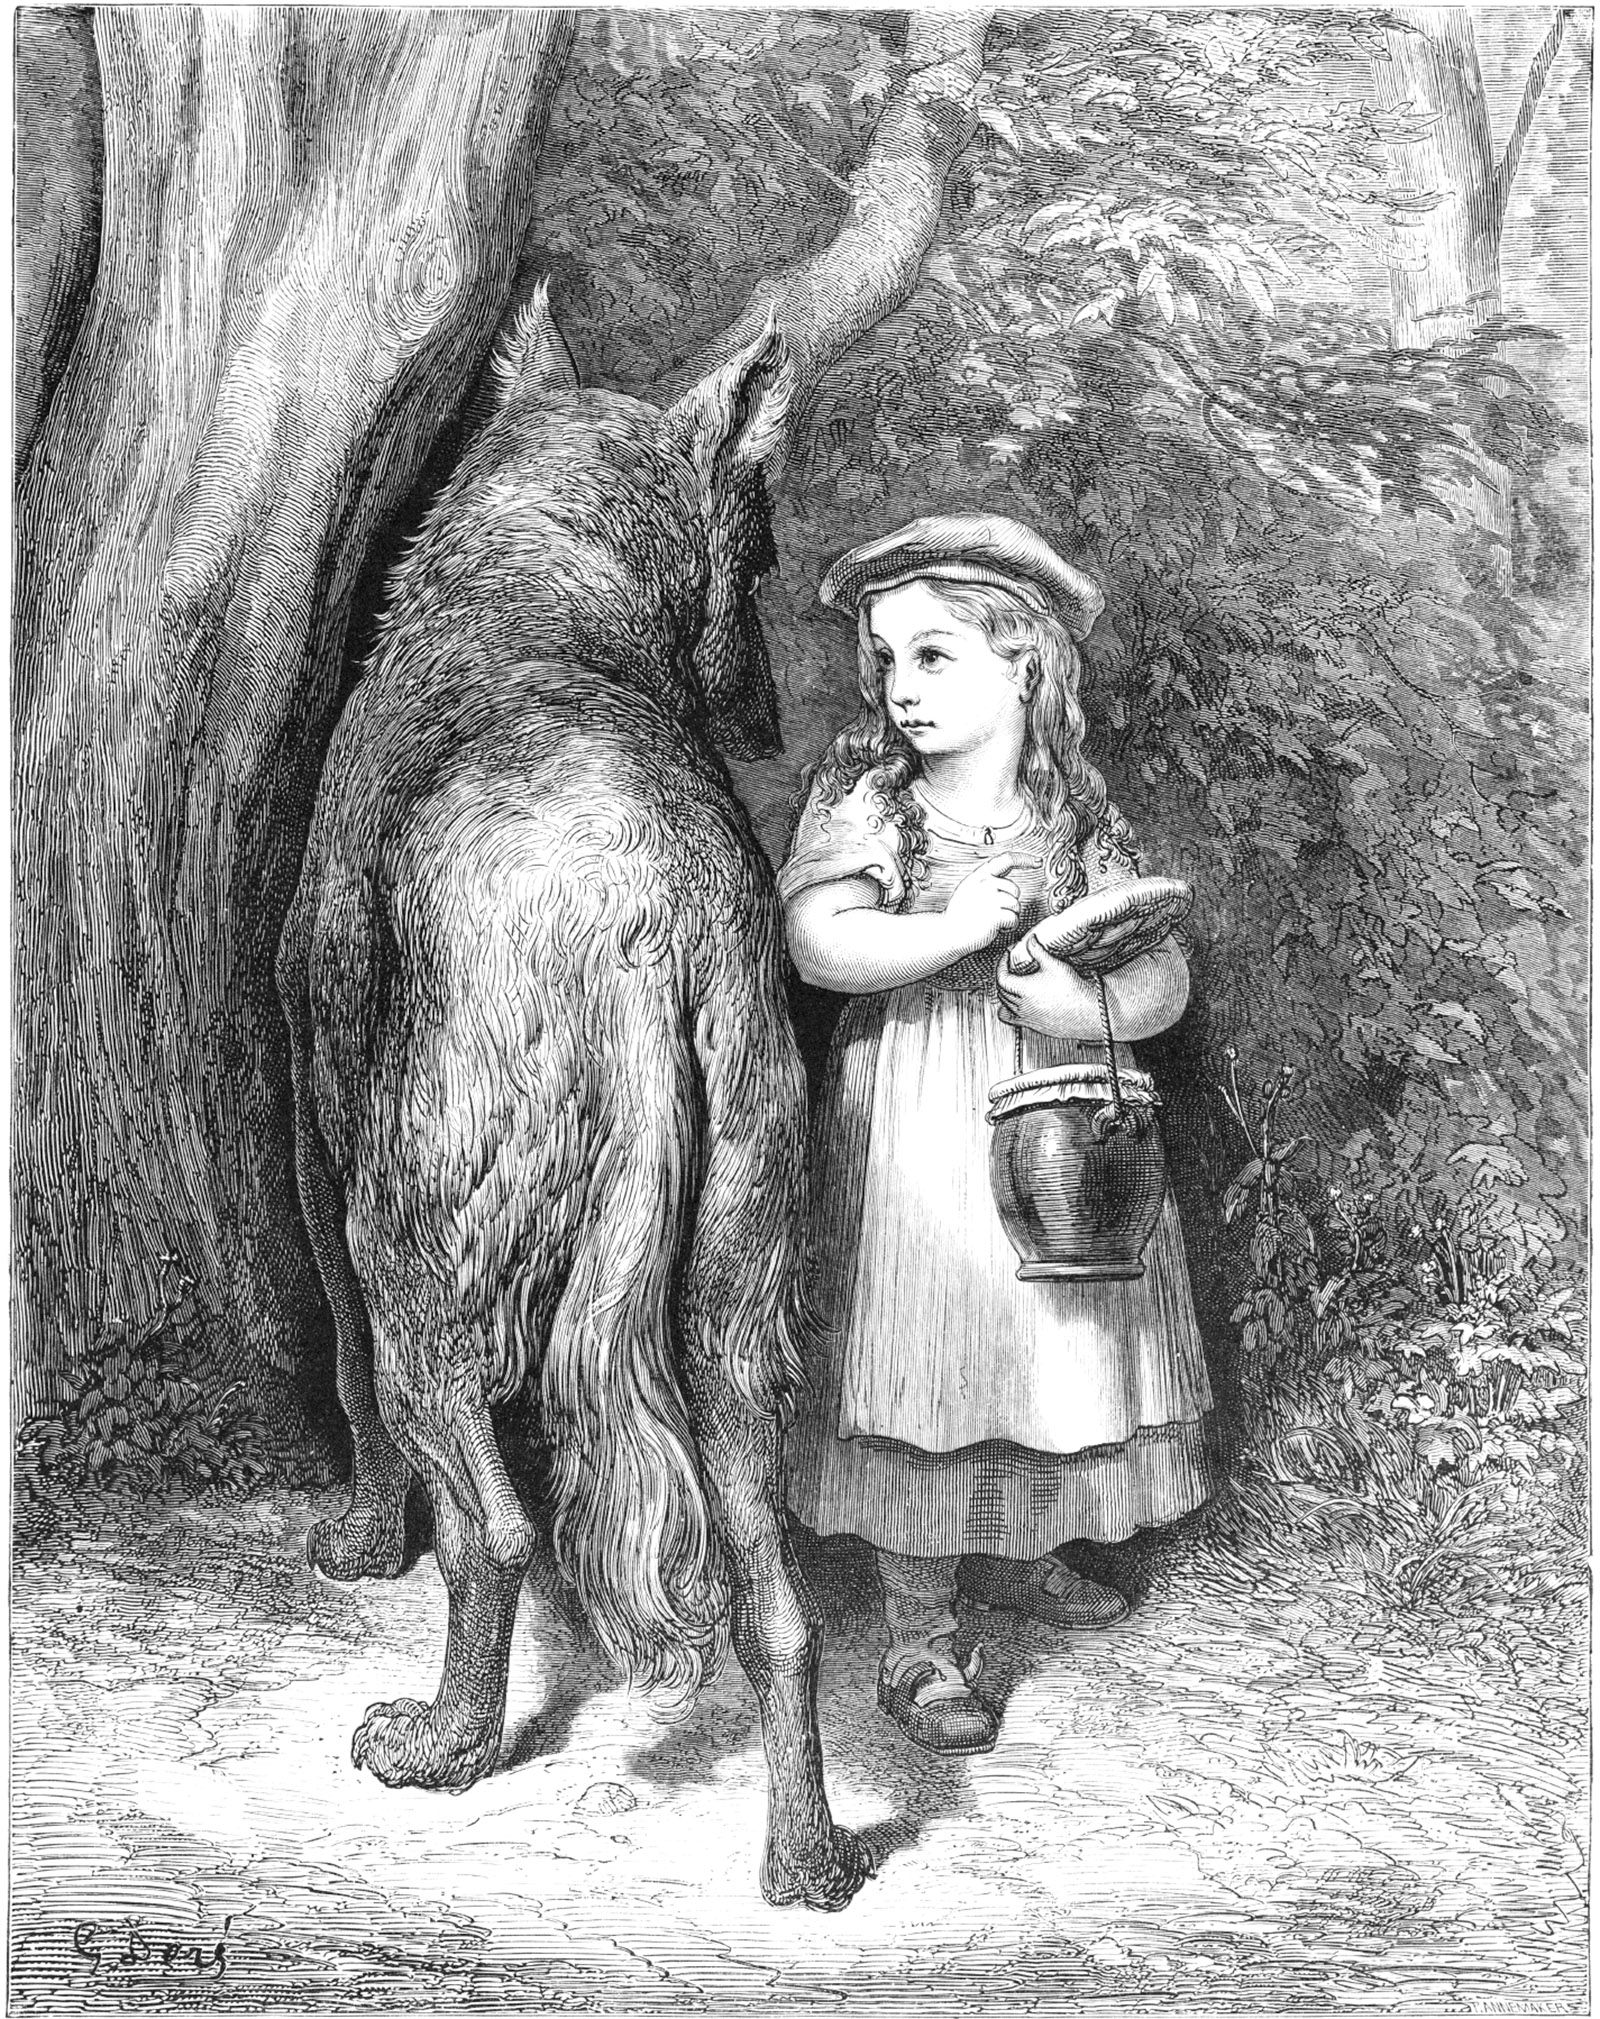 Engraving of Little Red Riding Hood and the wolf